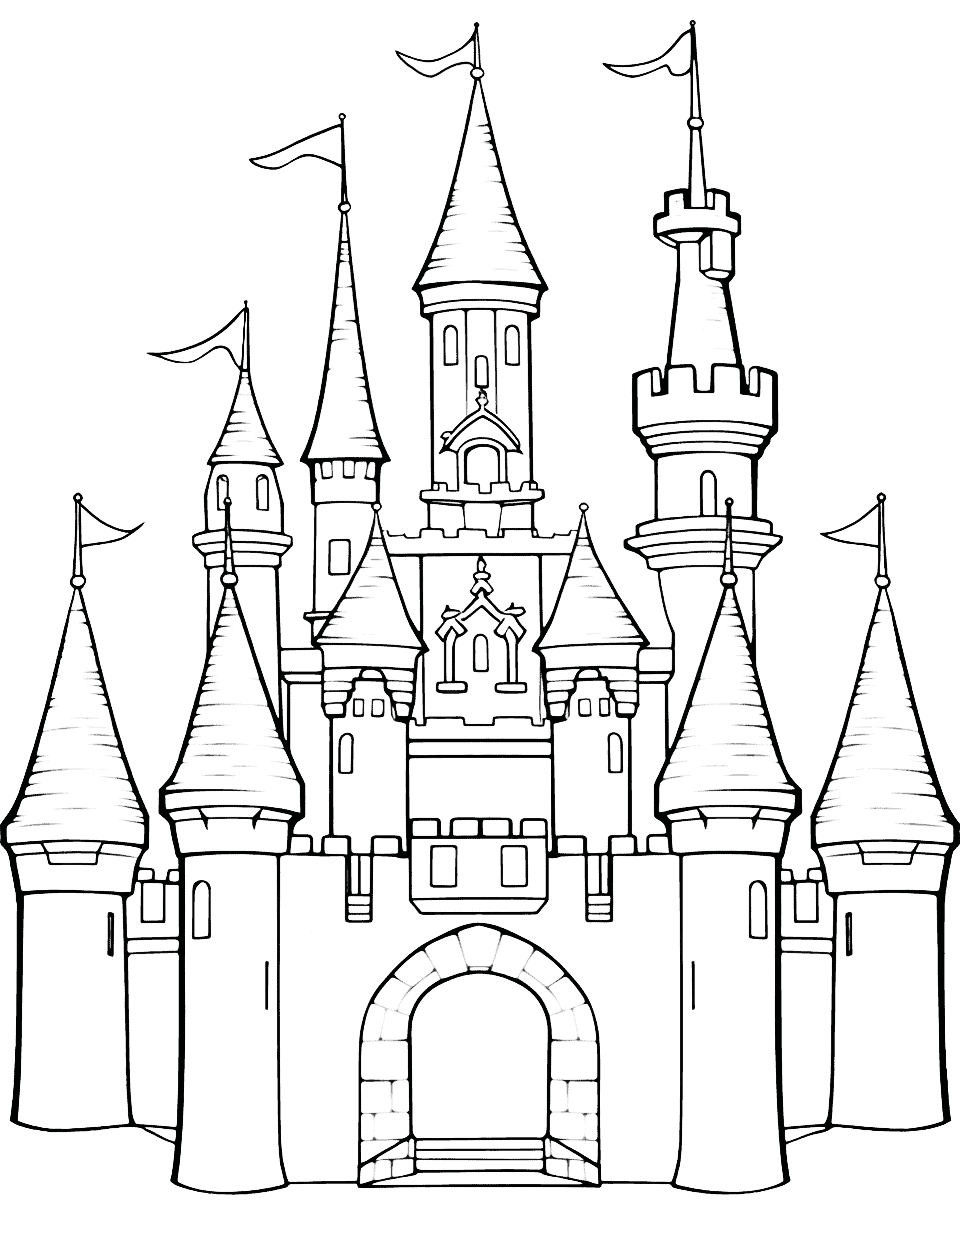 Disney Princess Castle Cute Coloring Page - A beautiful Disney themed castle with tall towers, thick stone walls, and pointy rooftops.